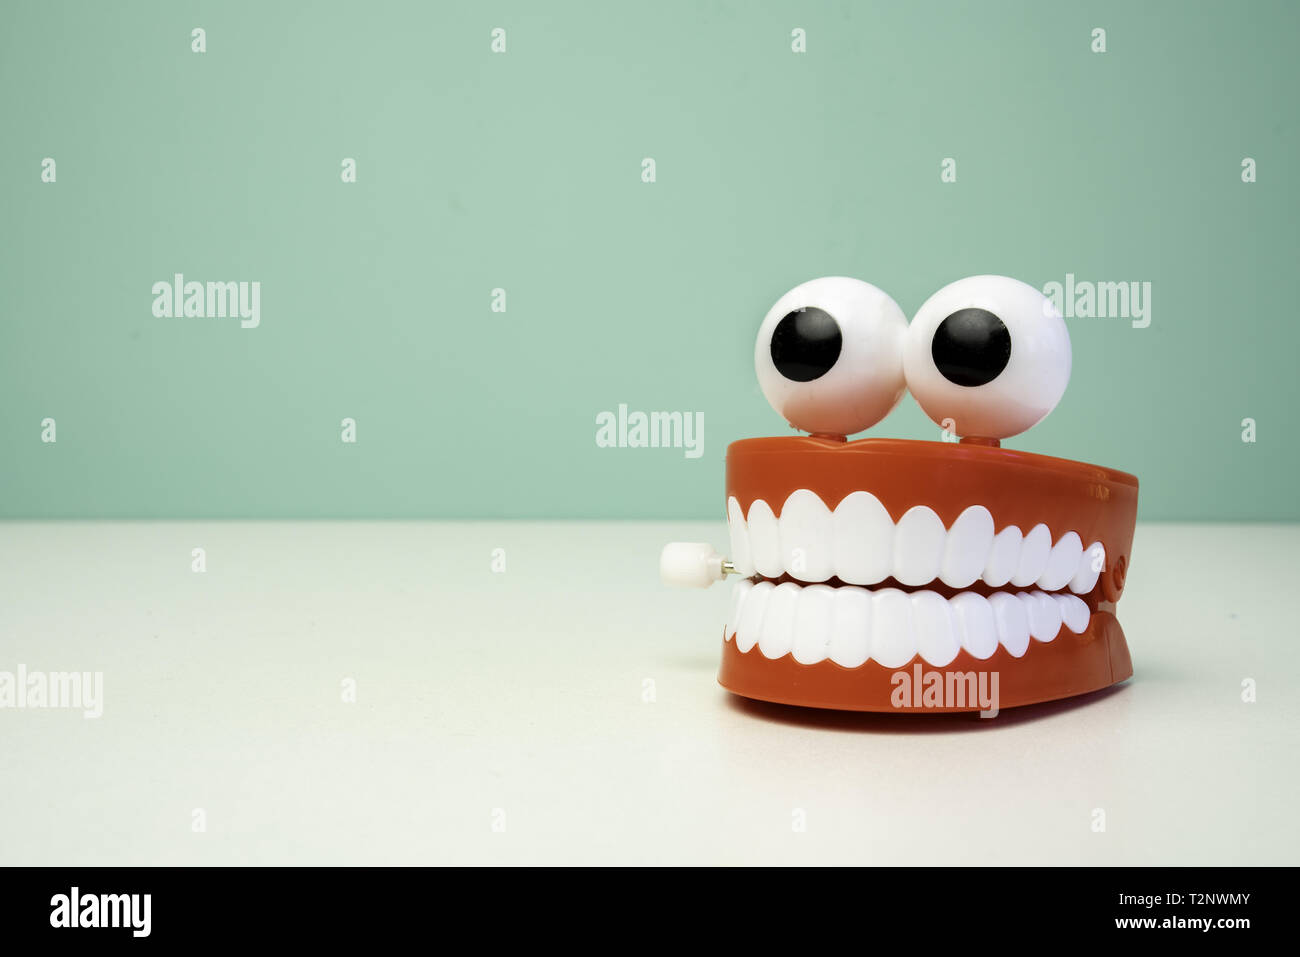 chattering teeth toy on a table with a green background. Jaw funny teeth  Stock Photo - Alamy